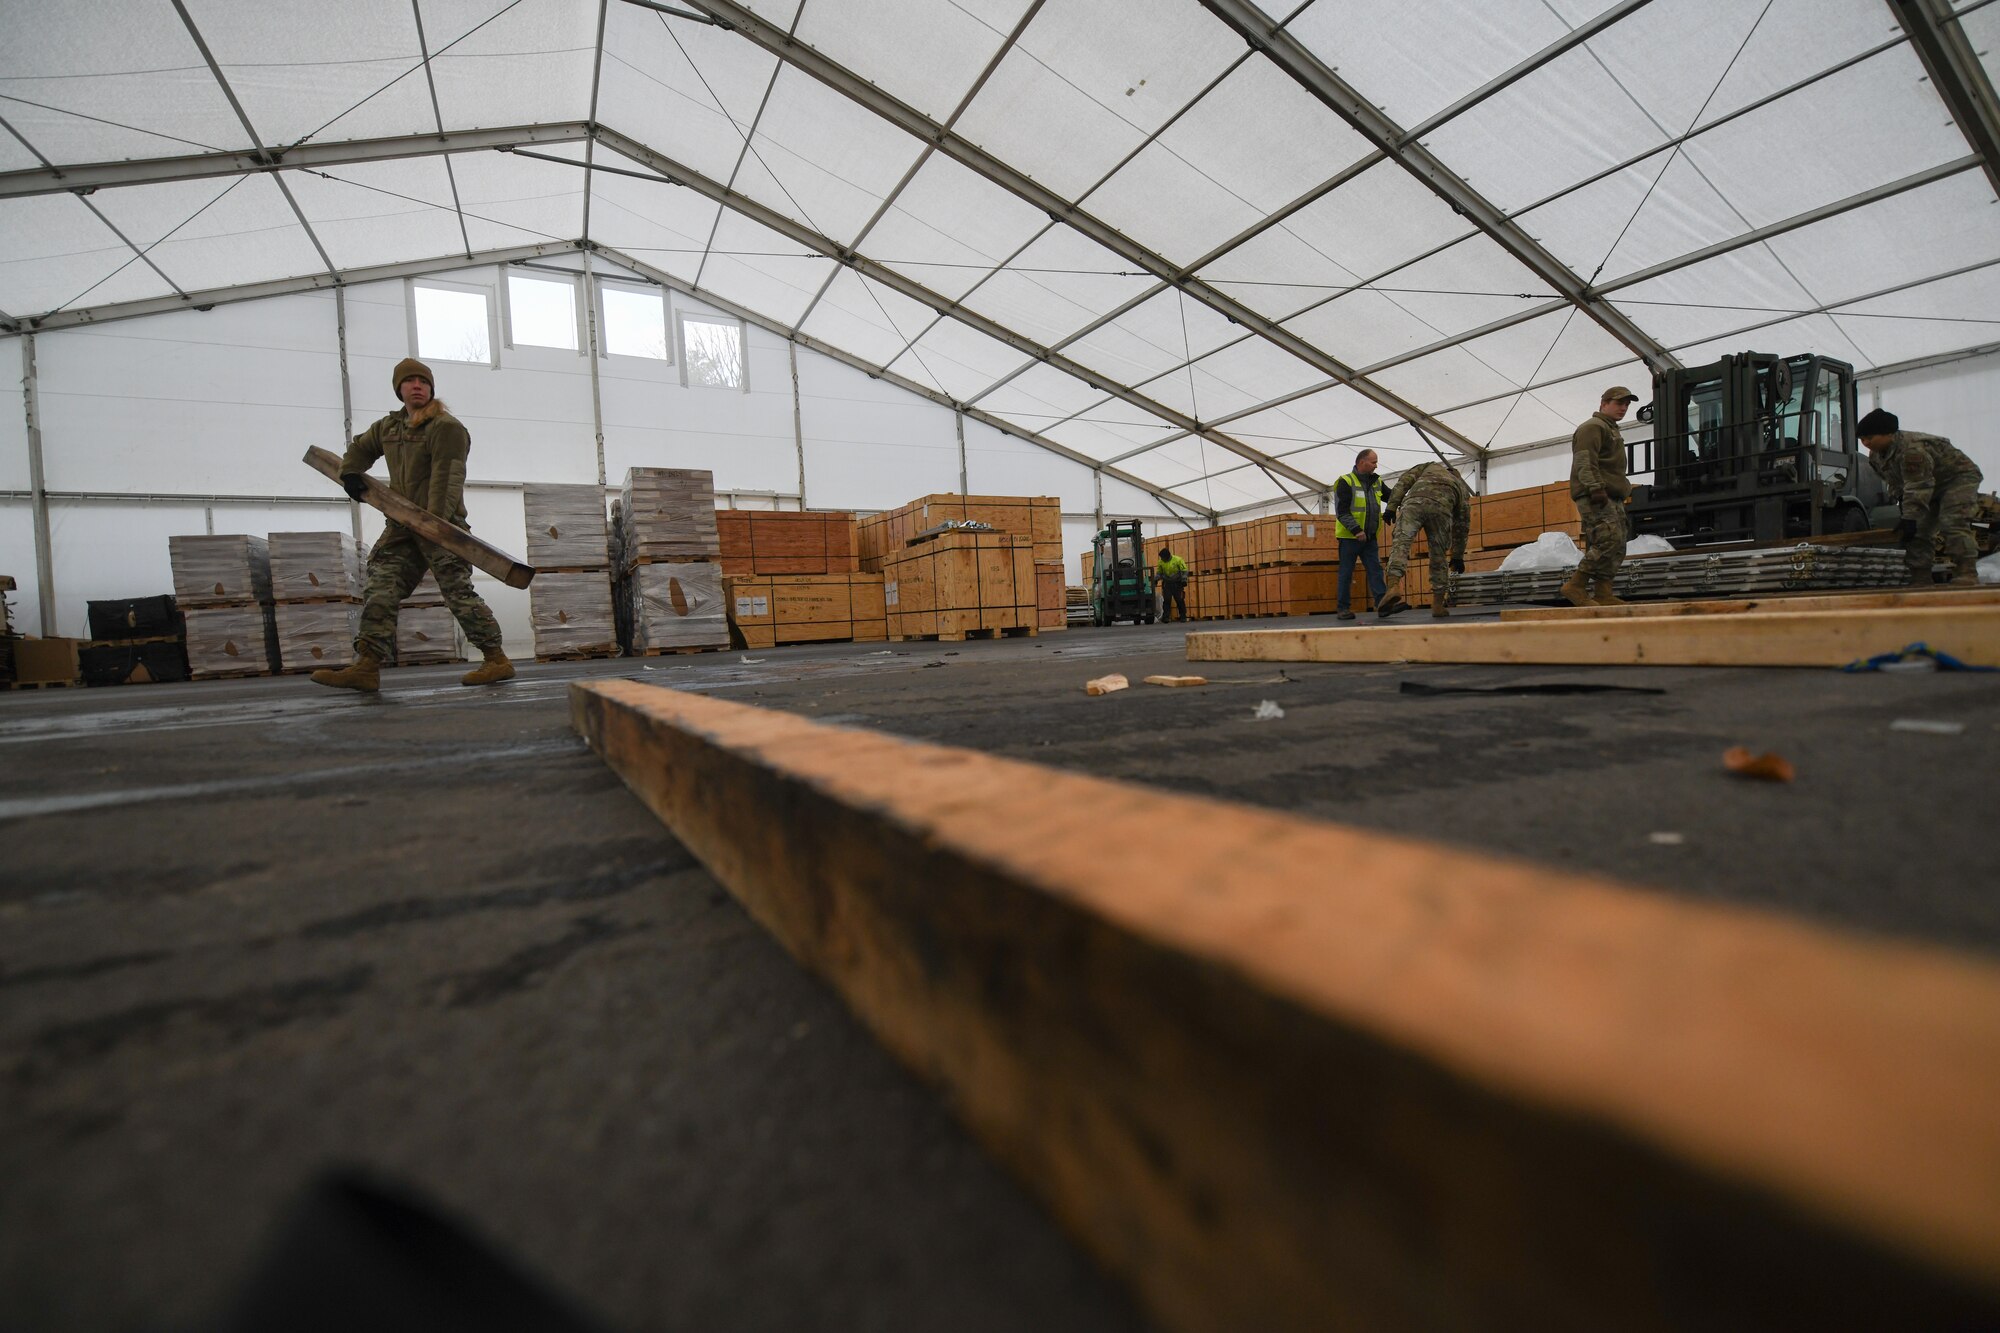 U.S. Air Force Staff Sgt. Holly Gibbs, 435th Air Expeditionary Wing air transportation craftsman, carries a four-by-four piece of dunnage to rest a pallet on at Ramstein Air Base, Germany, Jan 21, 2022. During a flood, U.S. and allied service member tents were damaged at Nigerien Air Base 101 and 201, which required replacements. The 435th AEW ensures Airmen have the resources to support counter-violent extremist operations in Africa and meet the demands of assigned missions. (U.S. Air Force photo by Senior Airman Ericka A. Woolever)